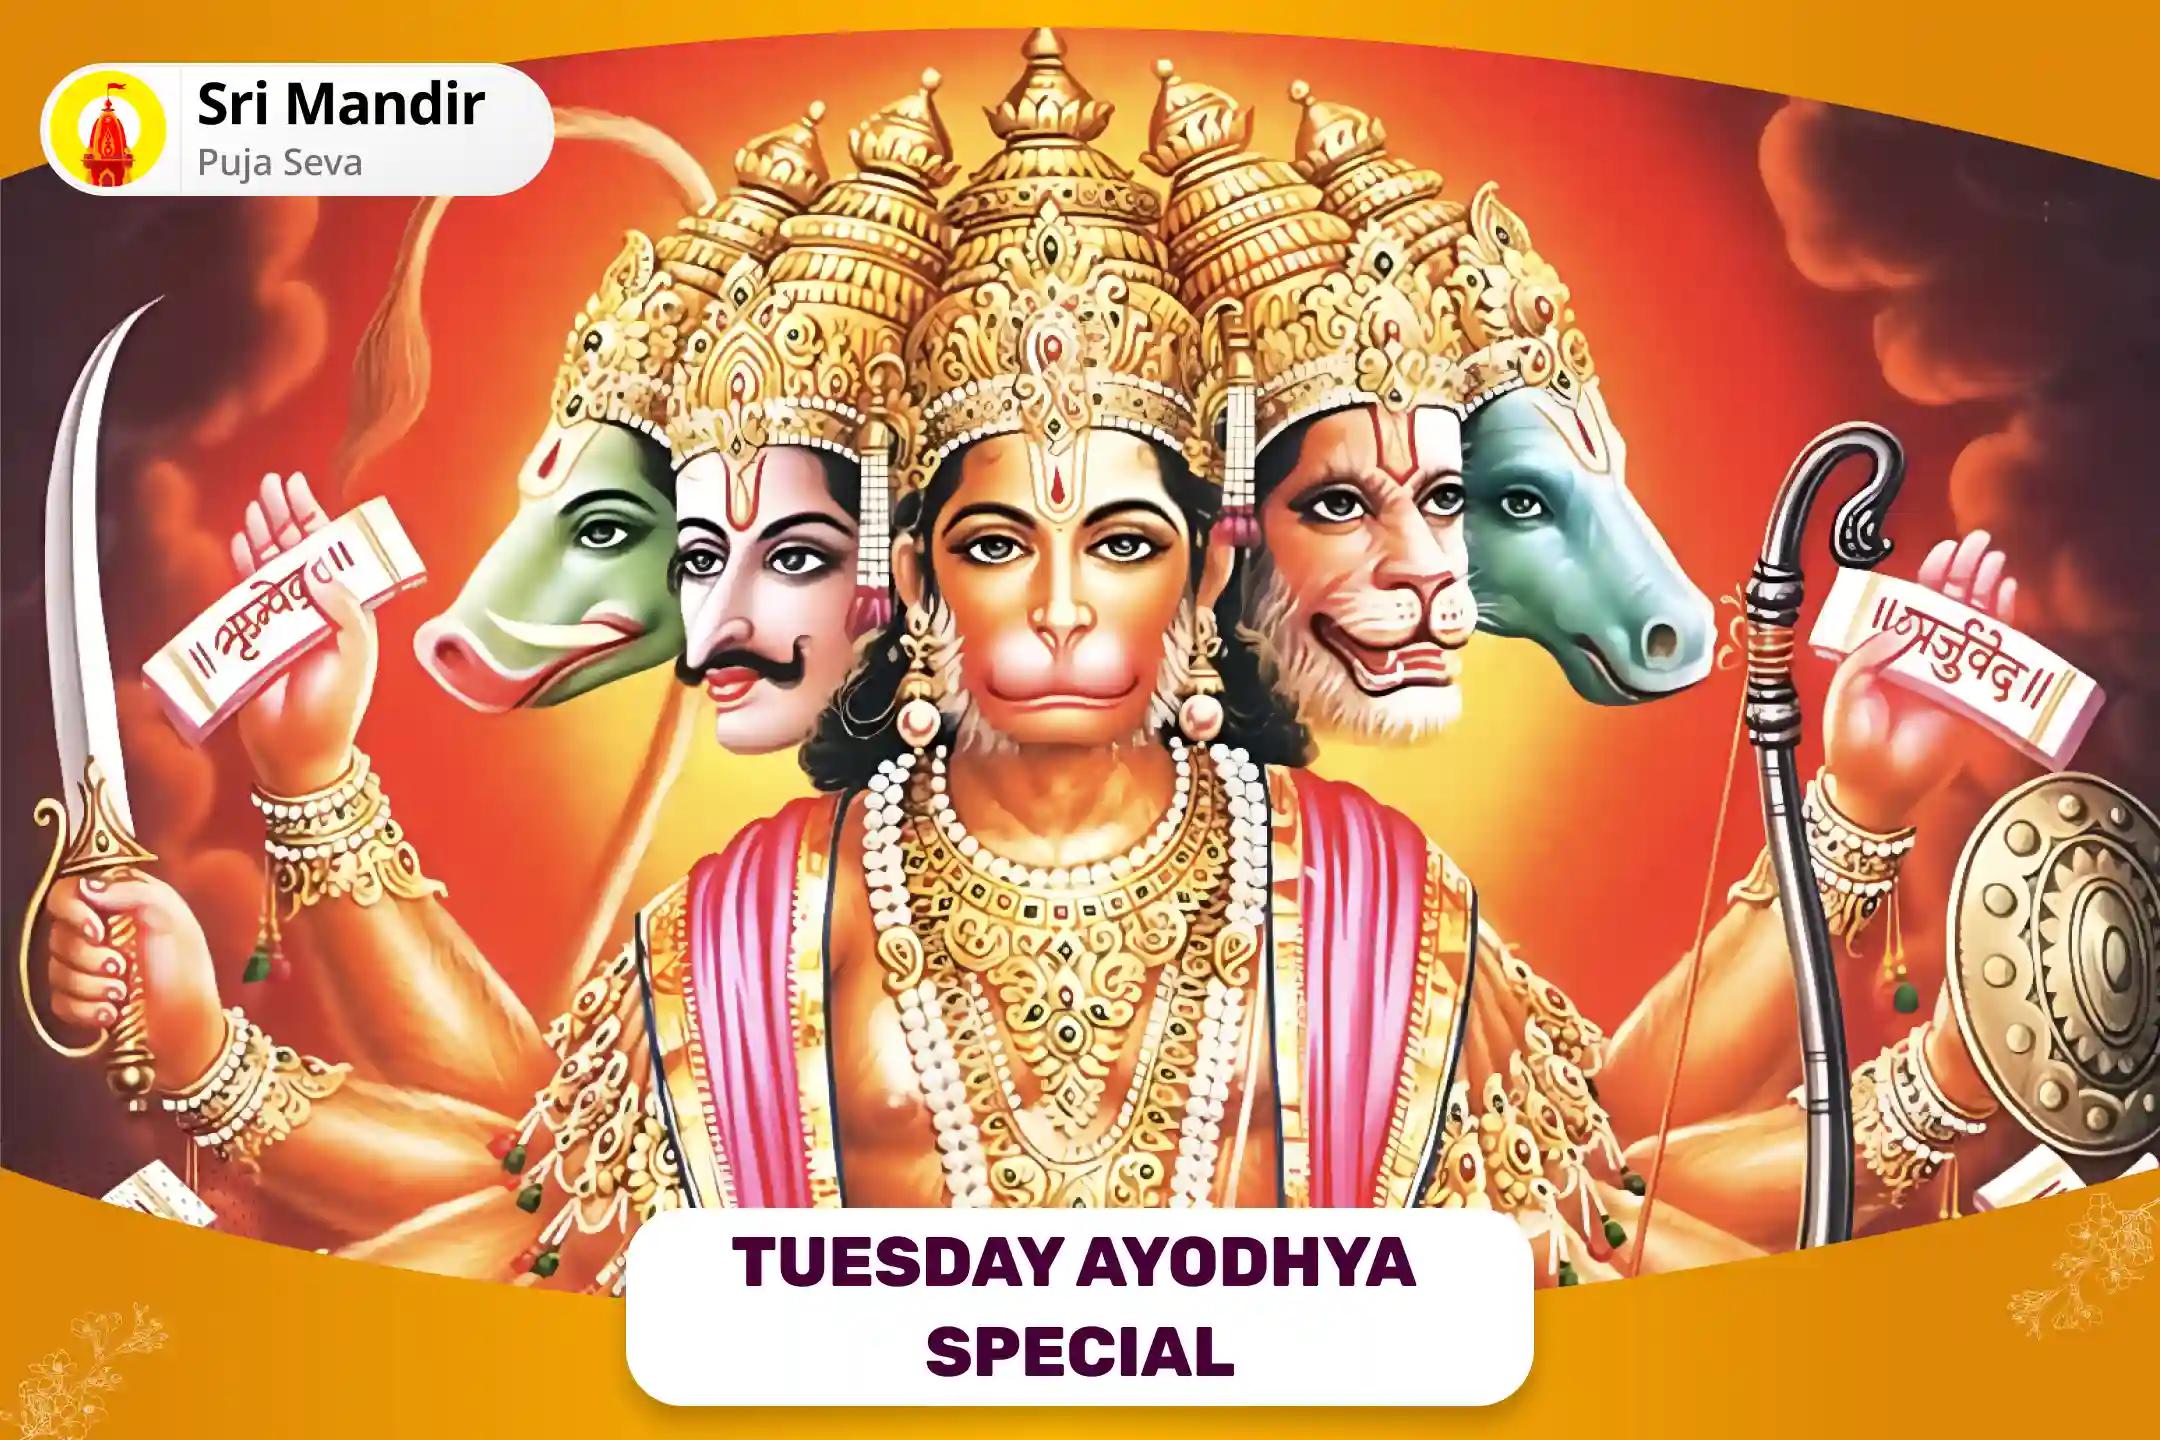 Tuesday Ayodhya Special 1008 Hanuman Rudra Mantra Jaap and Sundarkand Path for Courage and Strength to Overcome Obstacles in Life